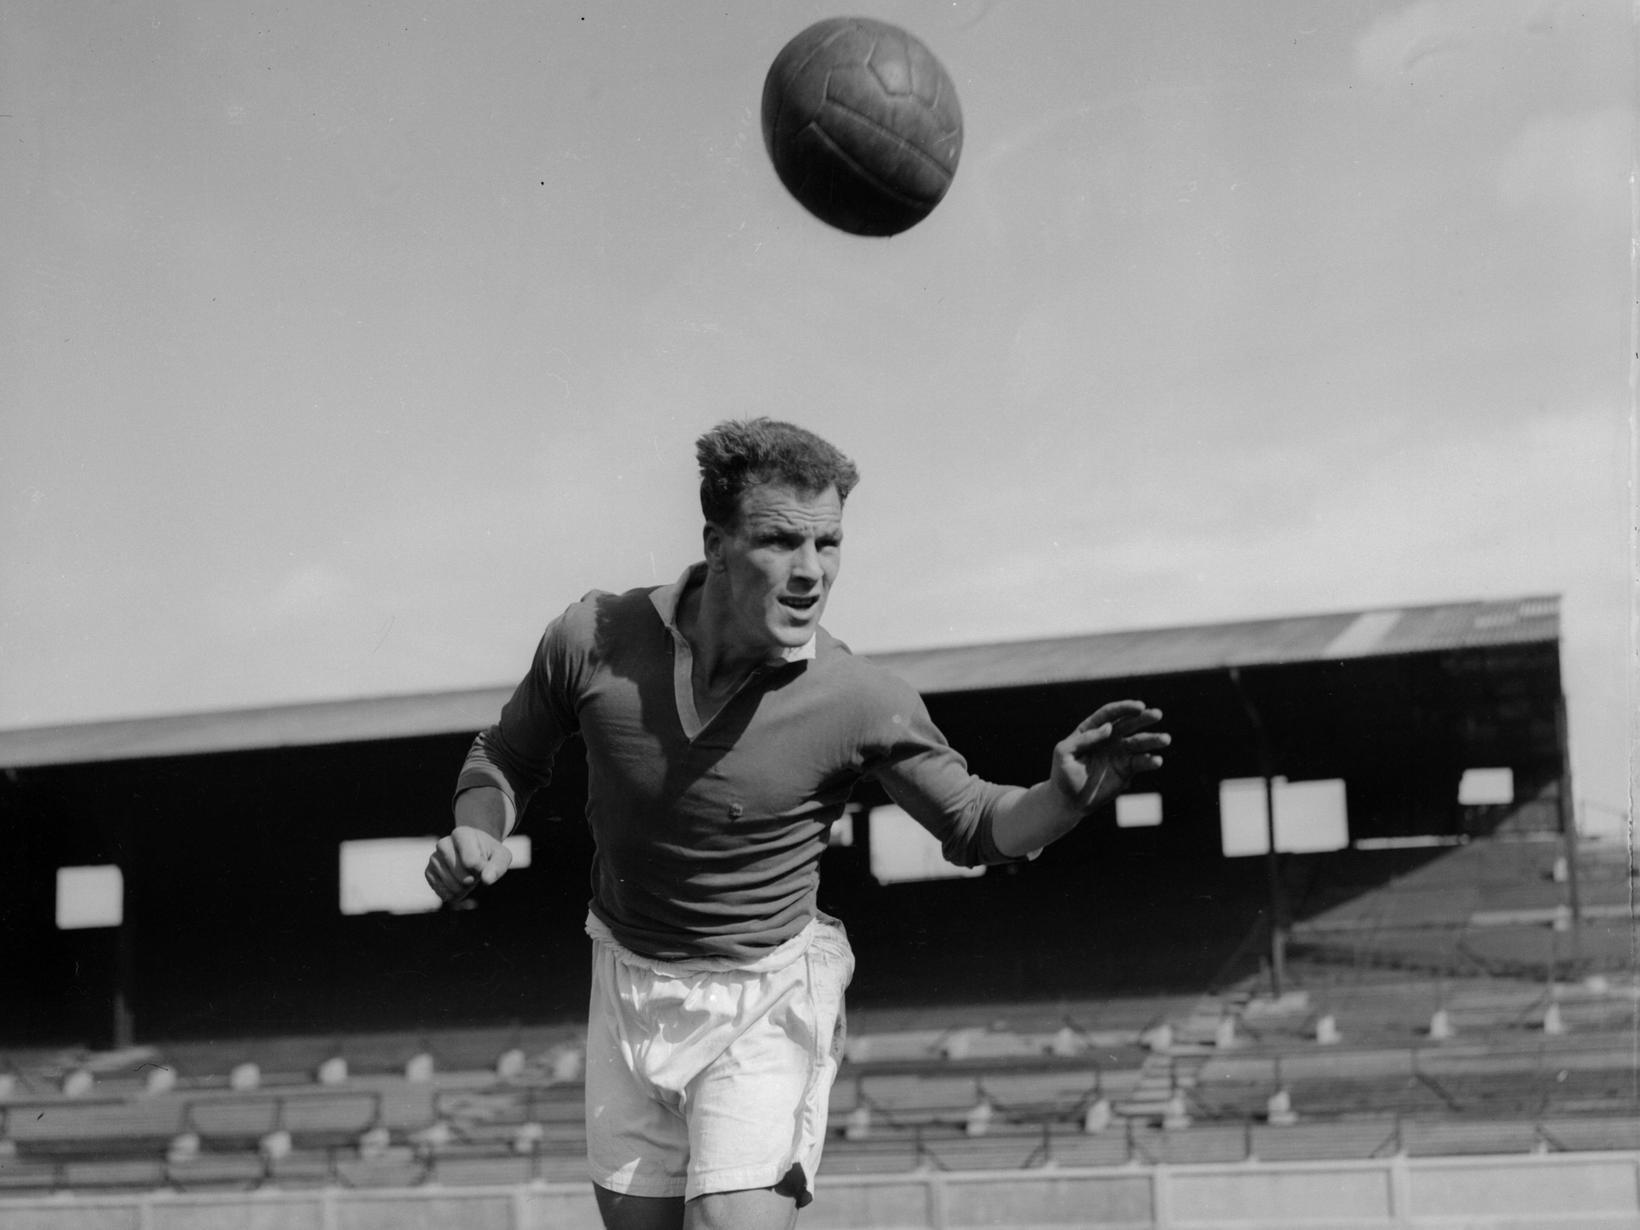 The great John Charles scored twice for Leeds United, who got the win they needed to gain promotion to the First Division. As many as 15,000 Leeds fans are said to have made the journey across to East Yorkshire.